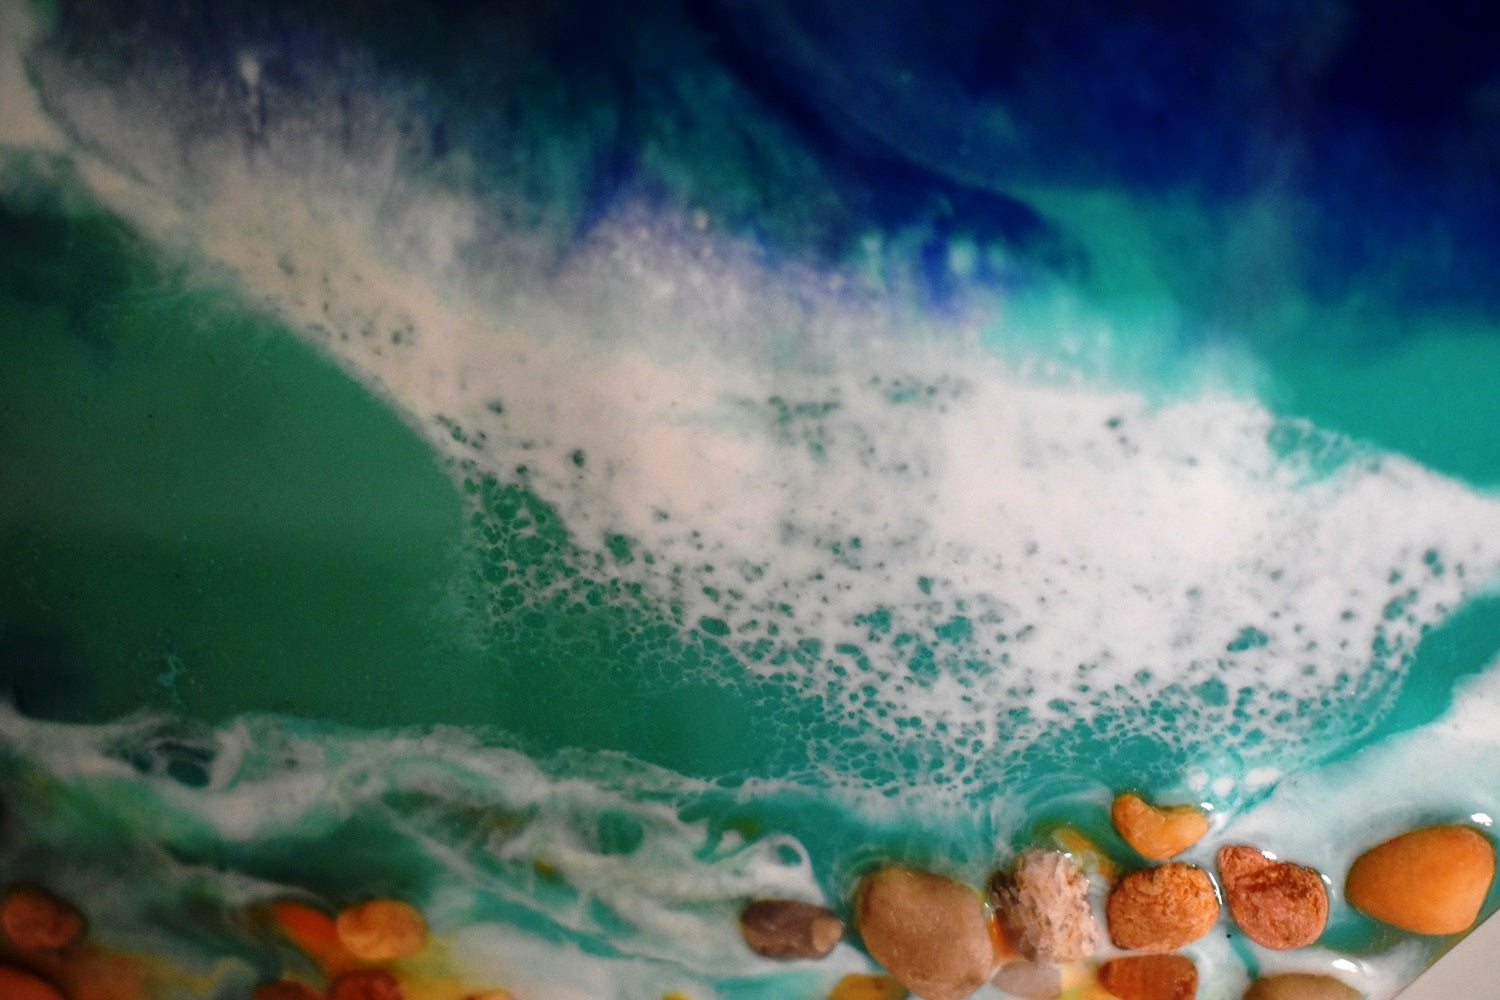 Turquoise Surf